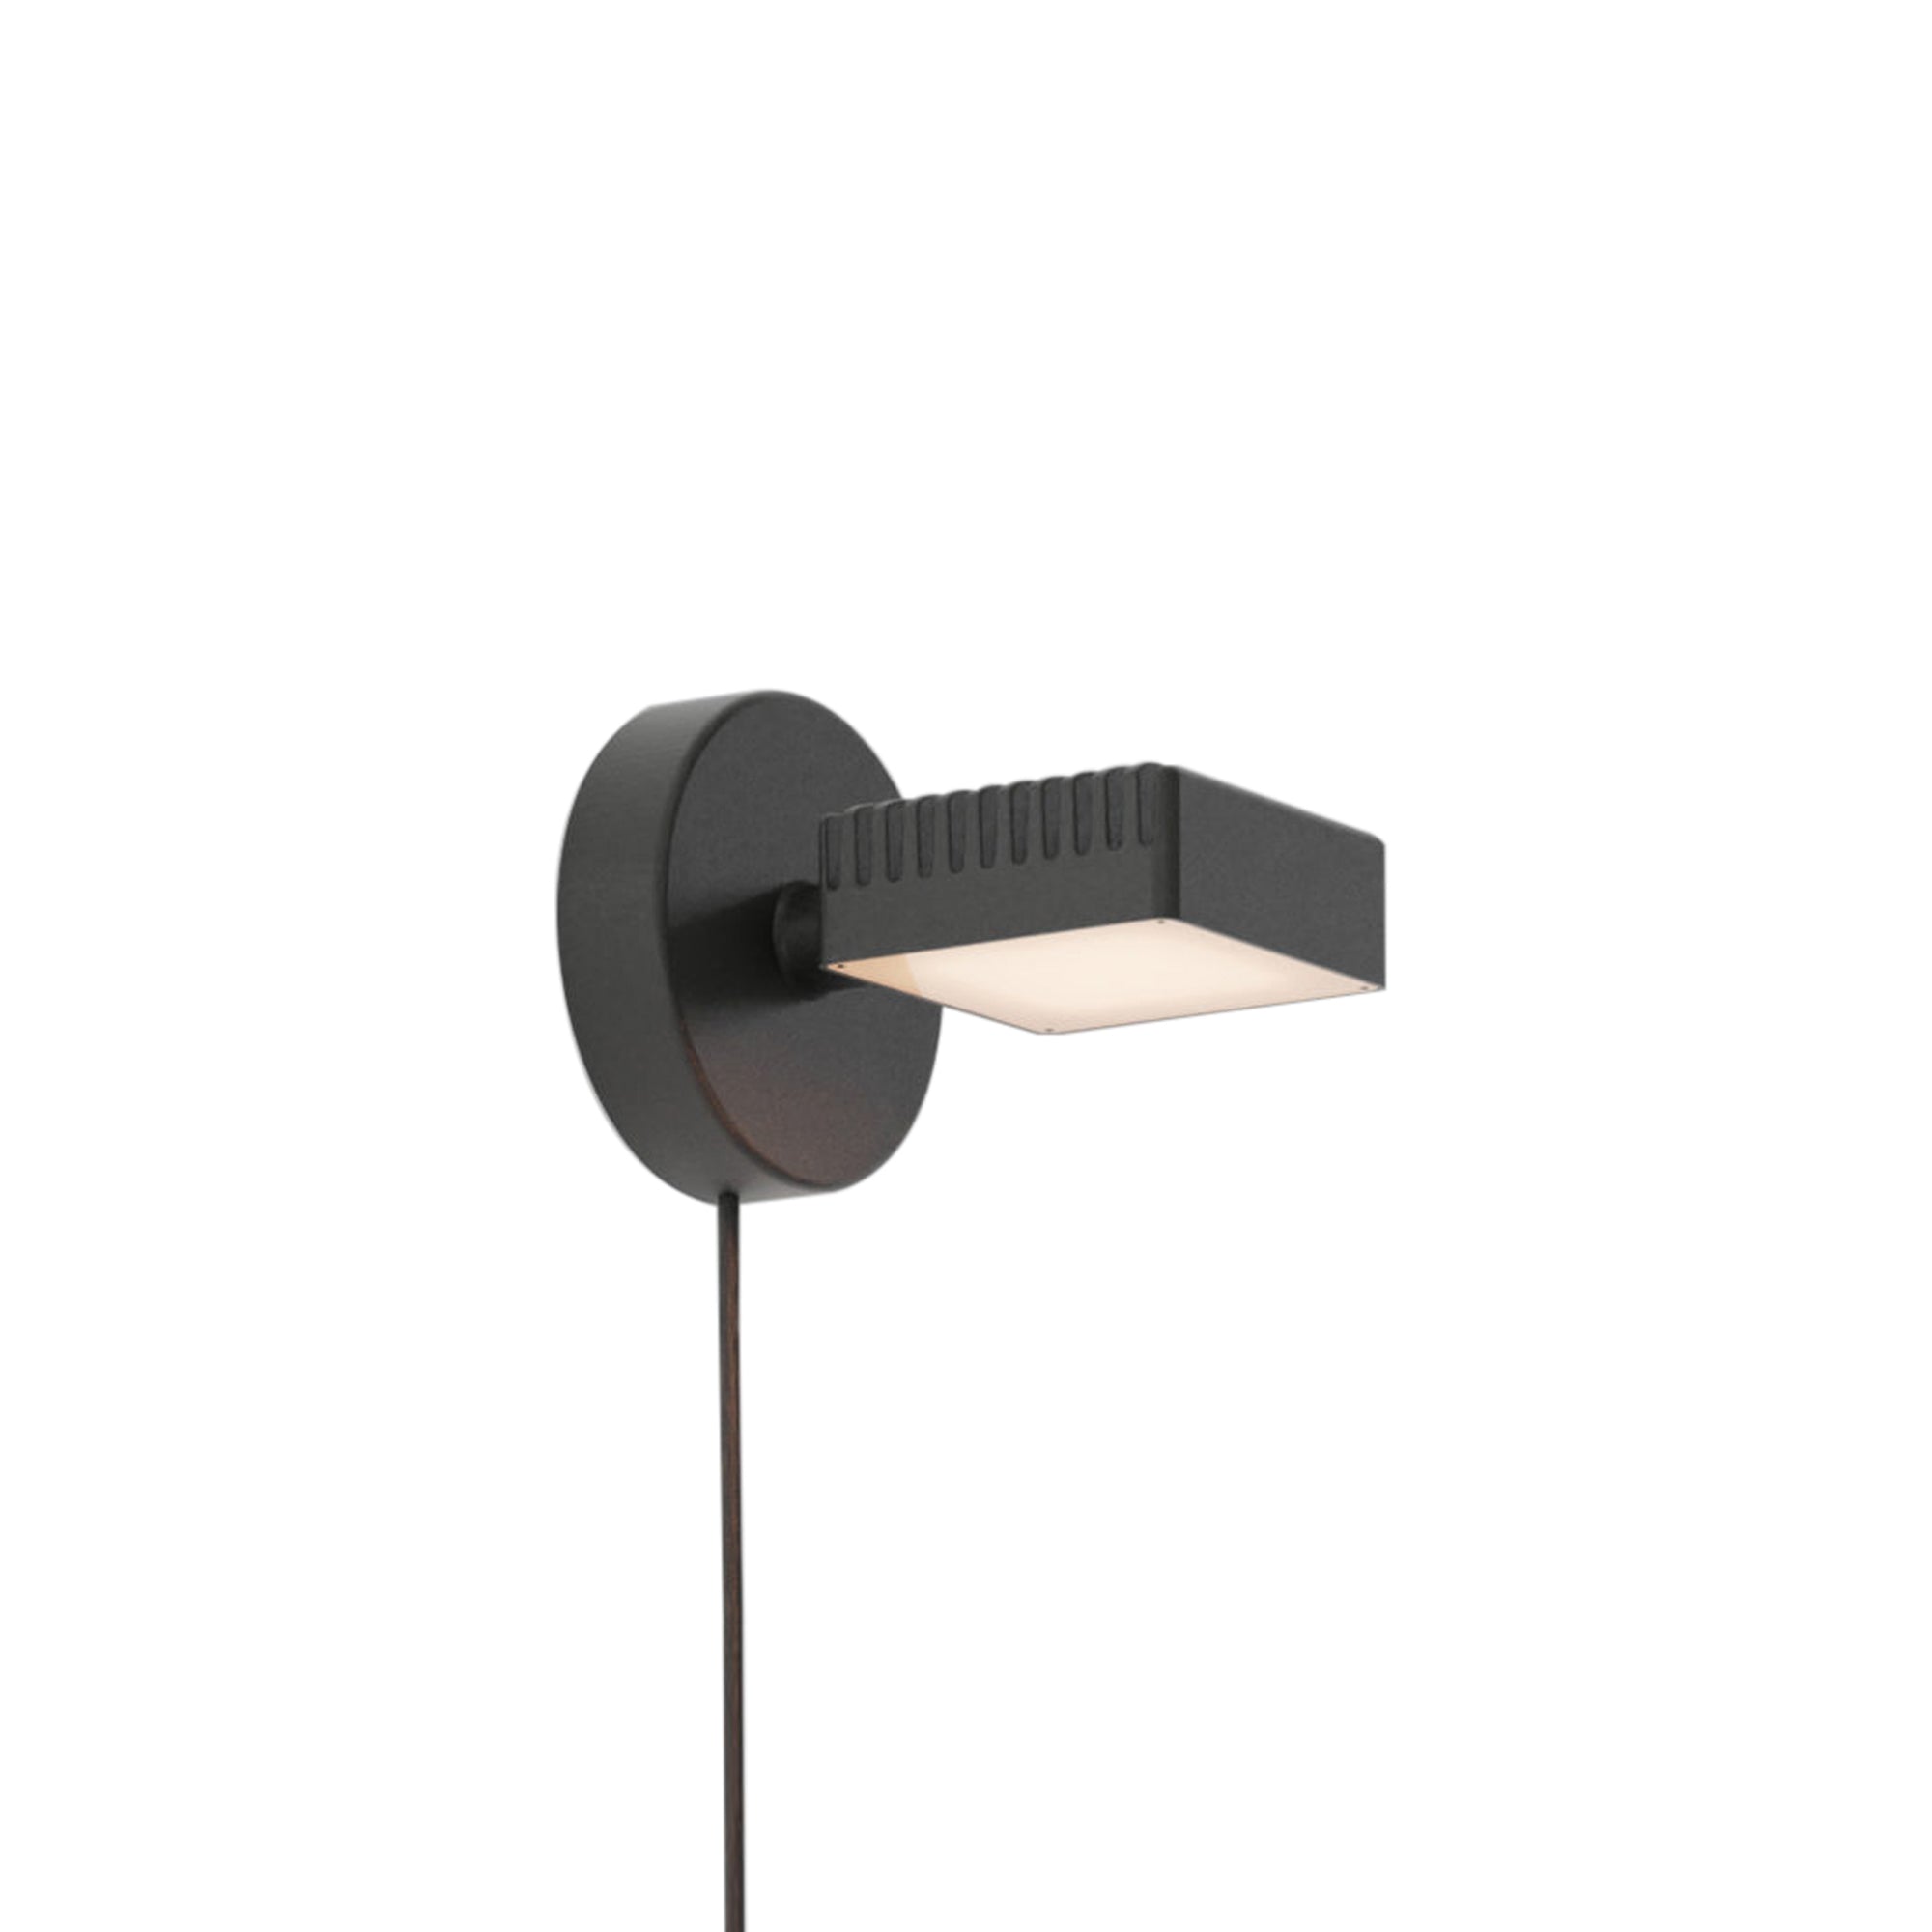 Dorval 04 Wall Lamp: Softwire + Black + Black